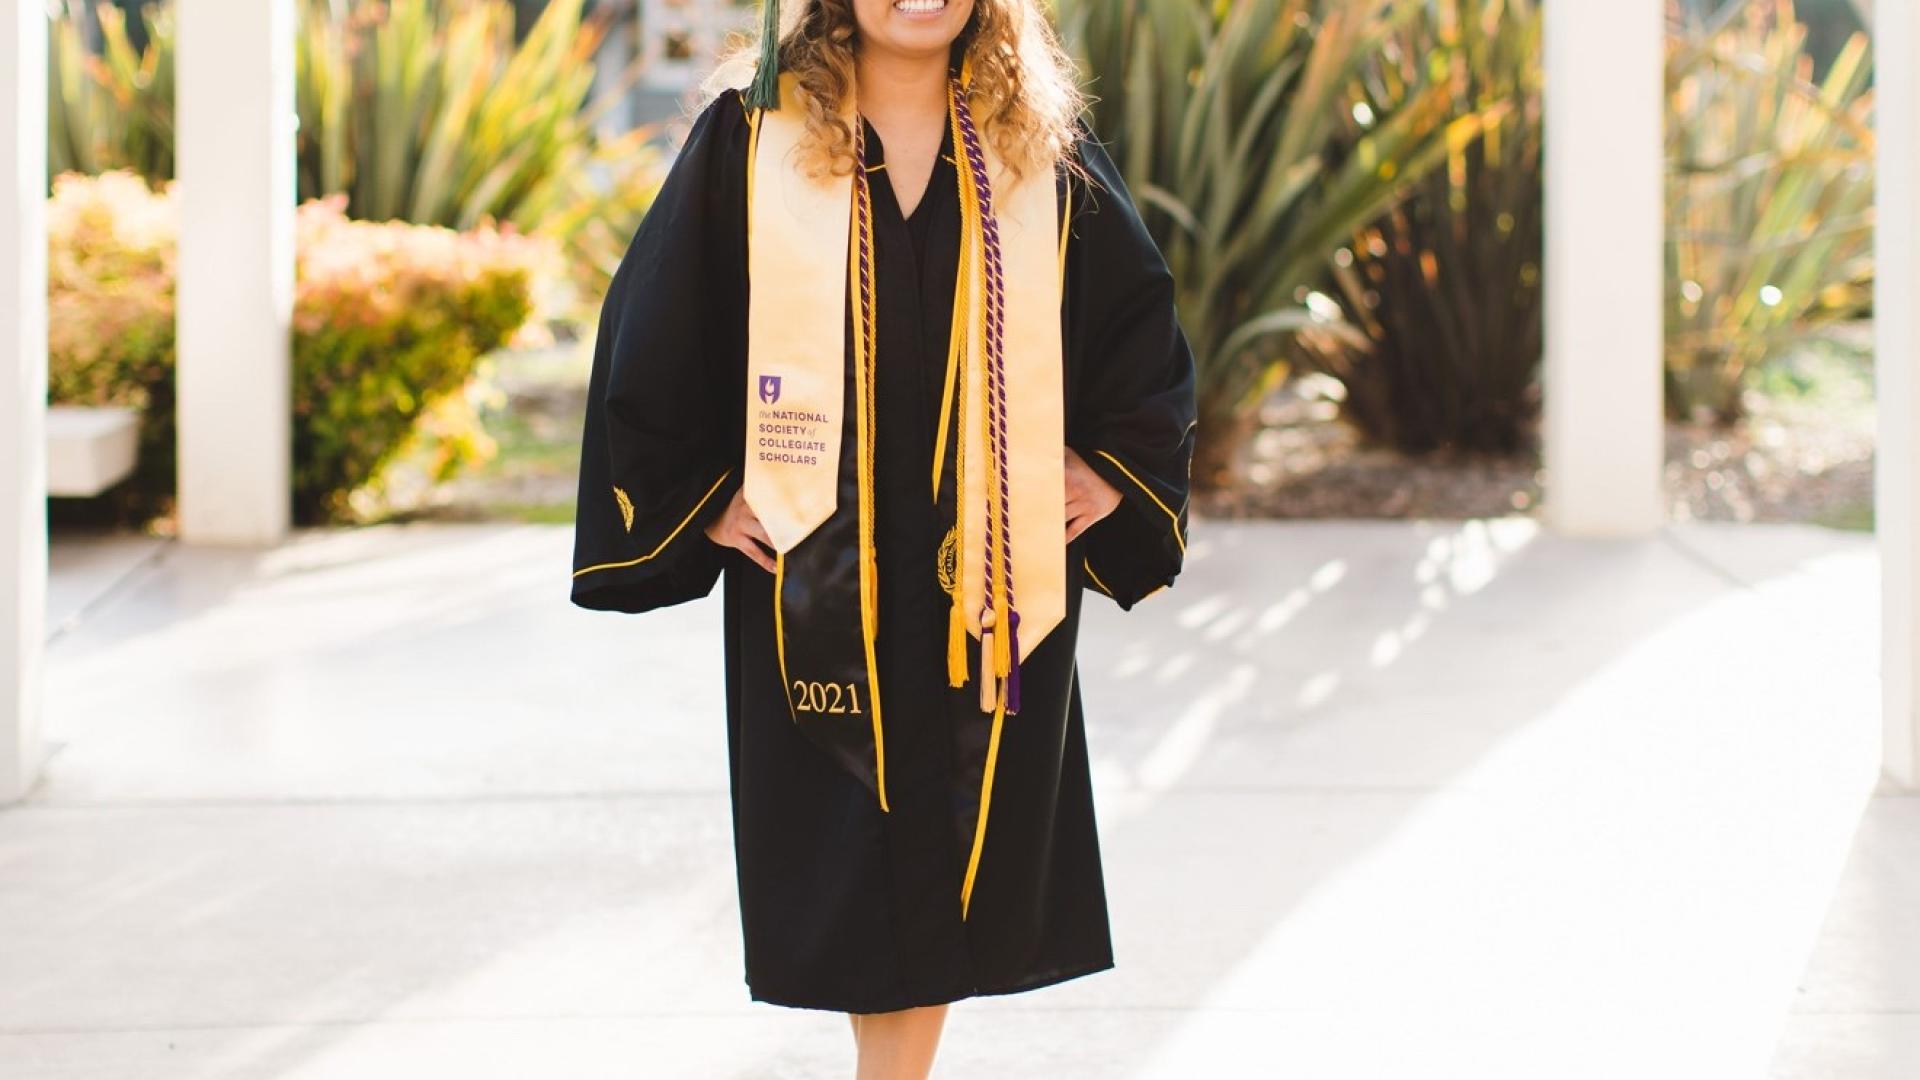 Gloria Hernandez in cap and gown on campus